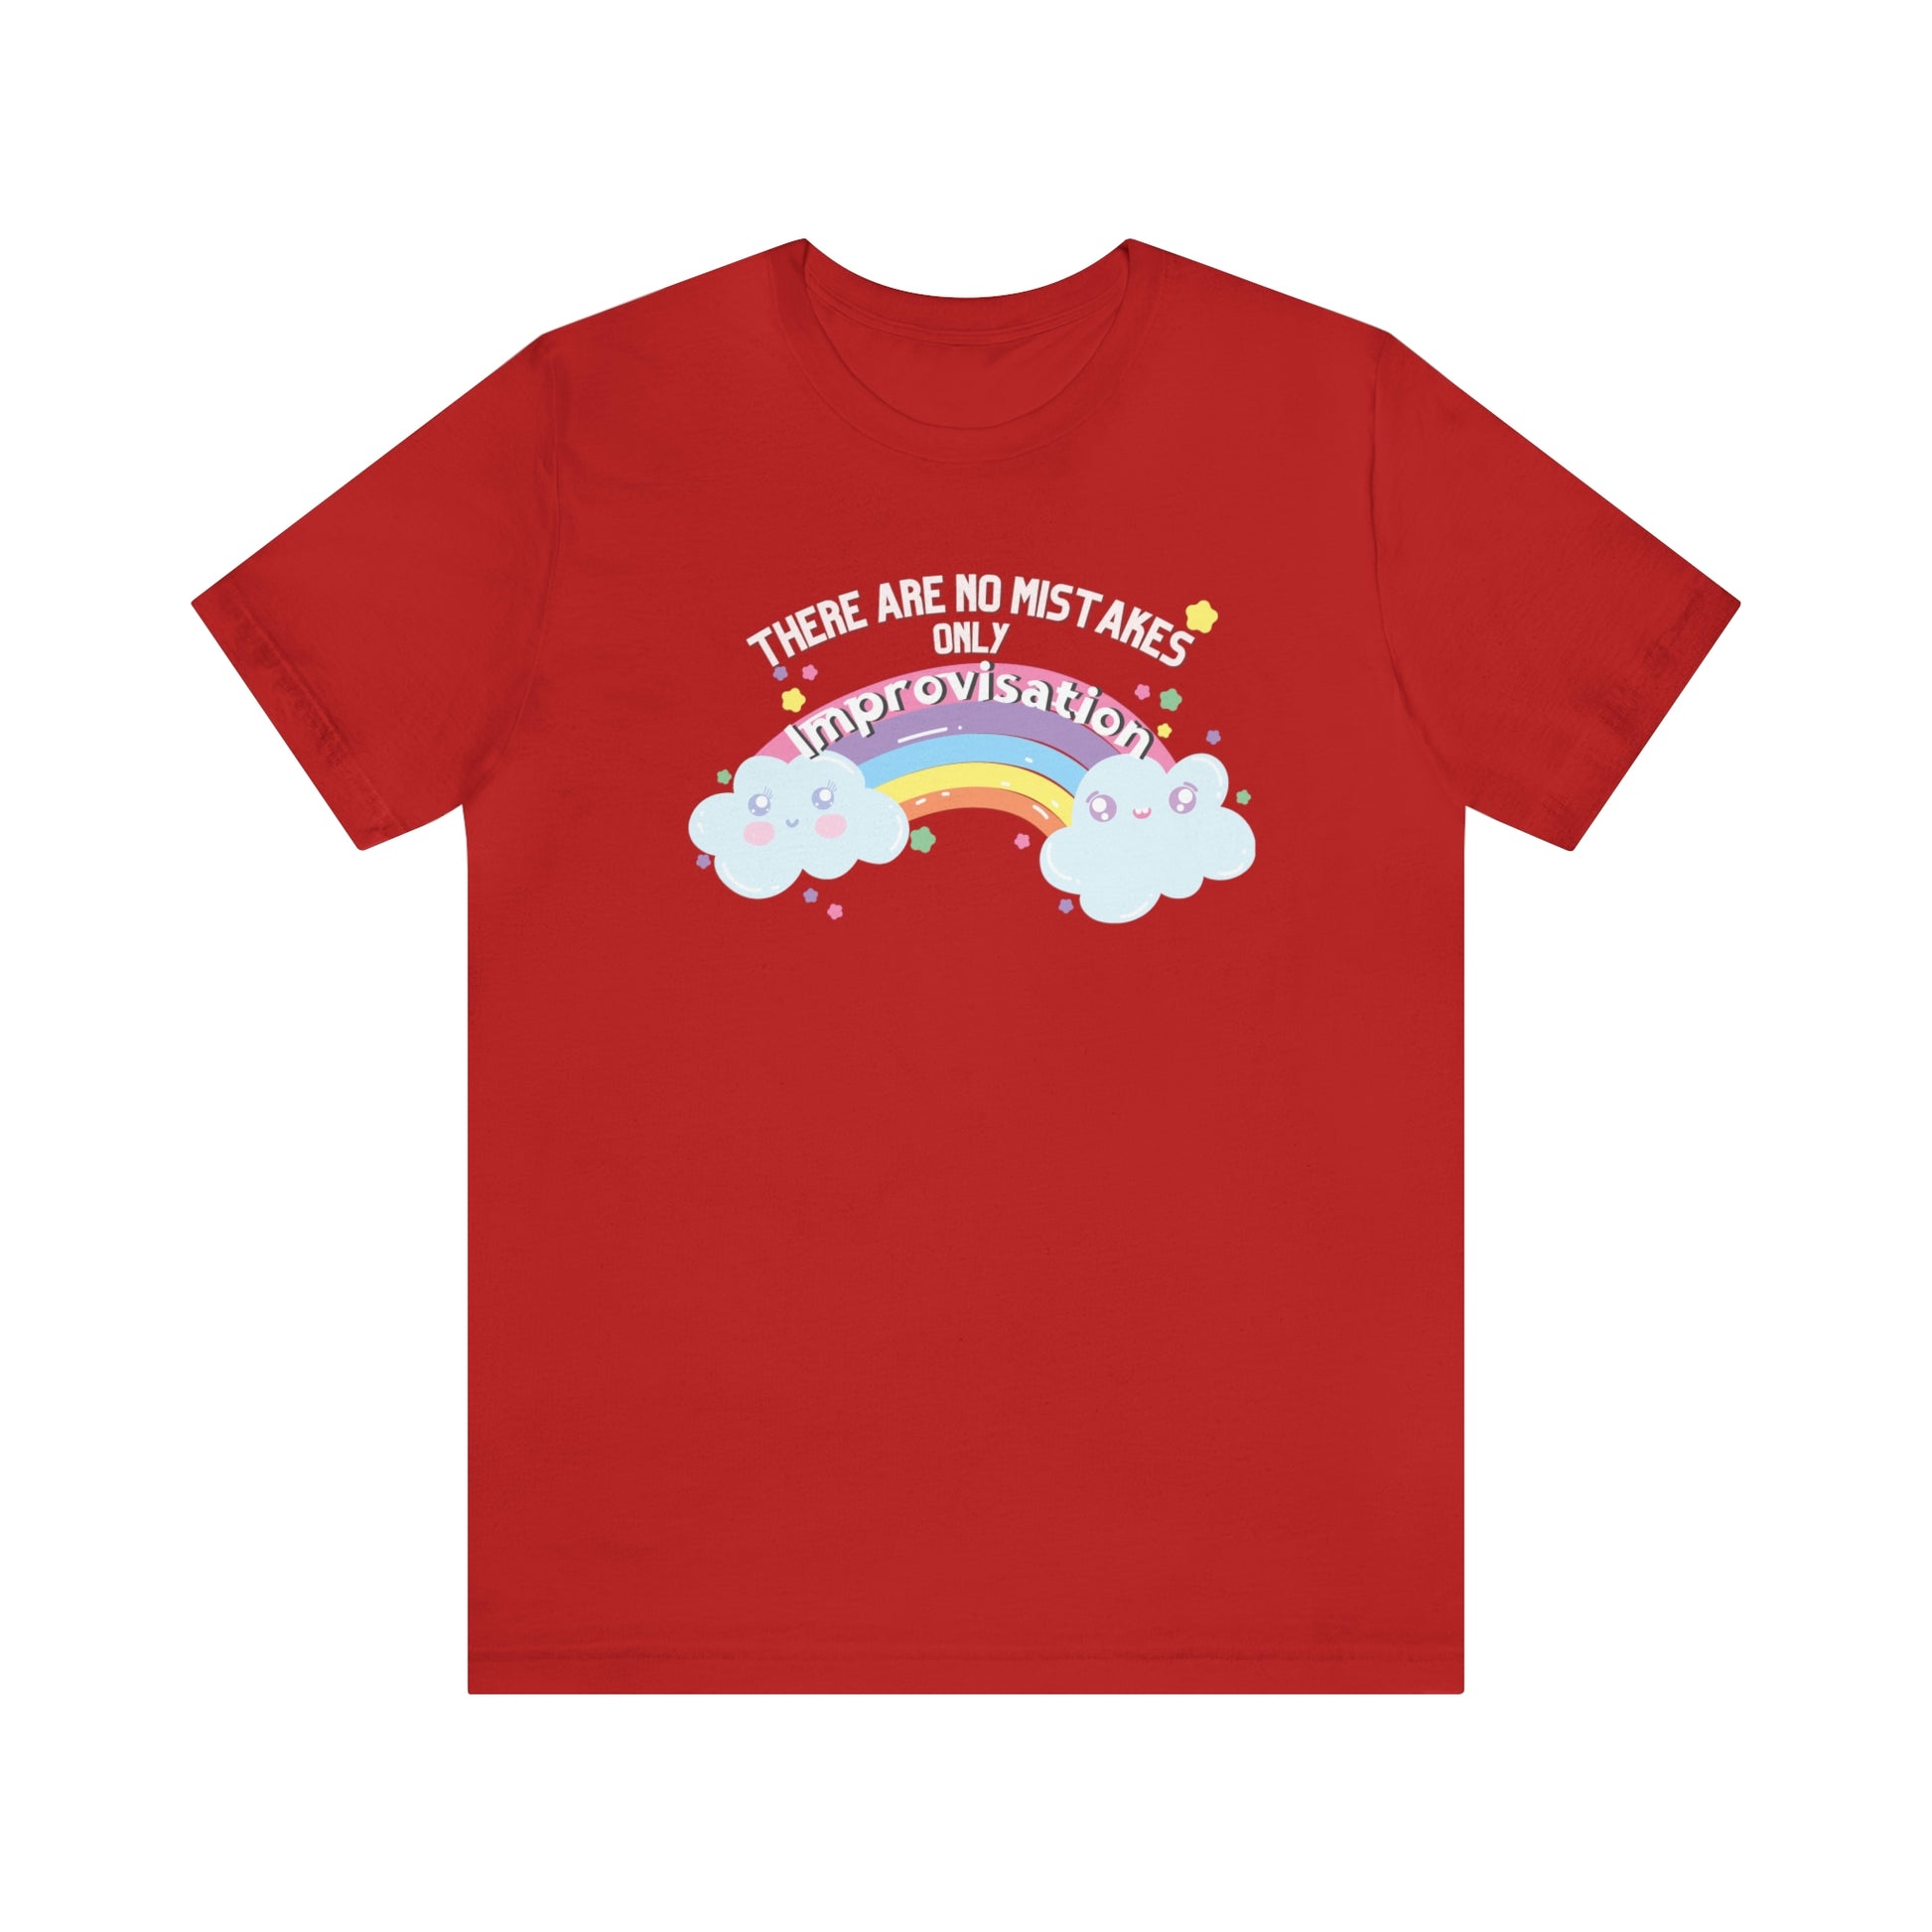 A T-shirt with the text "there are no mistakes only improvisation" and two happy clouds connected by a rainbow